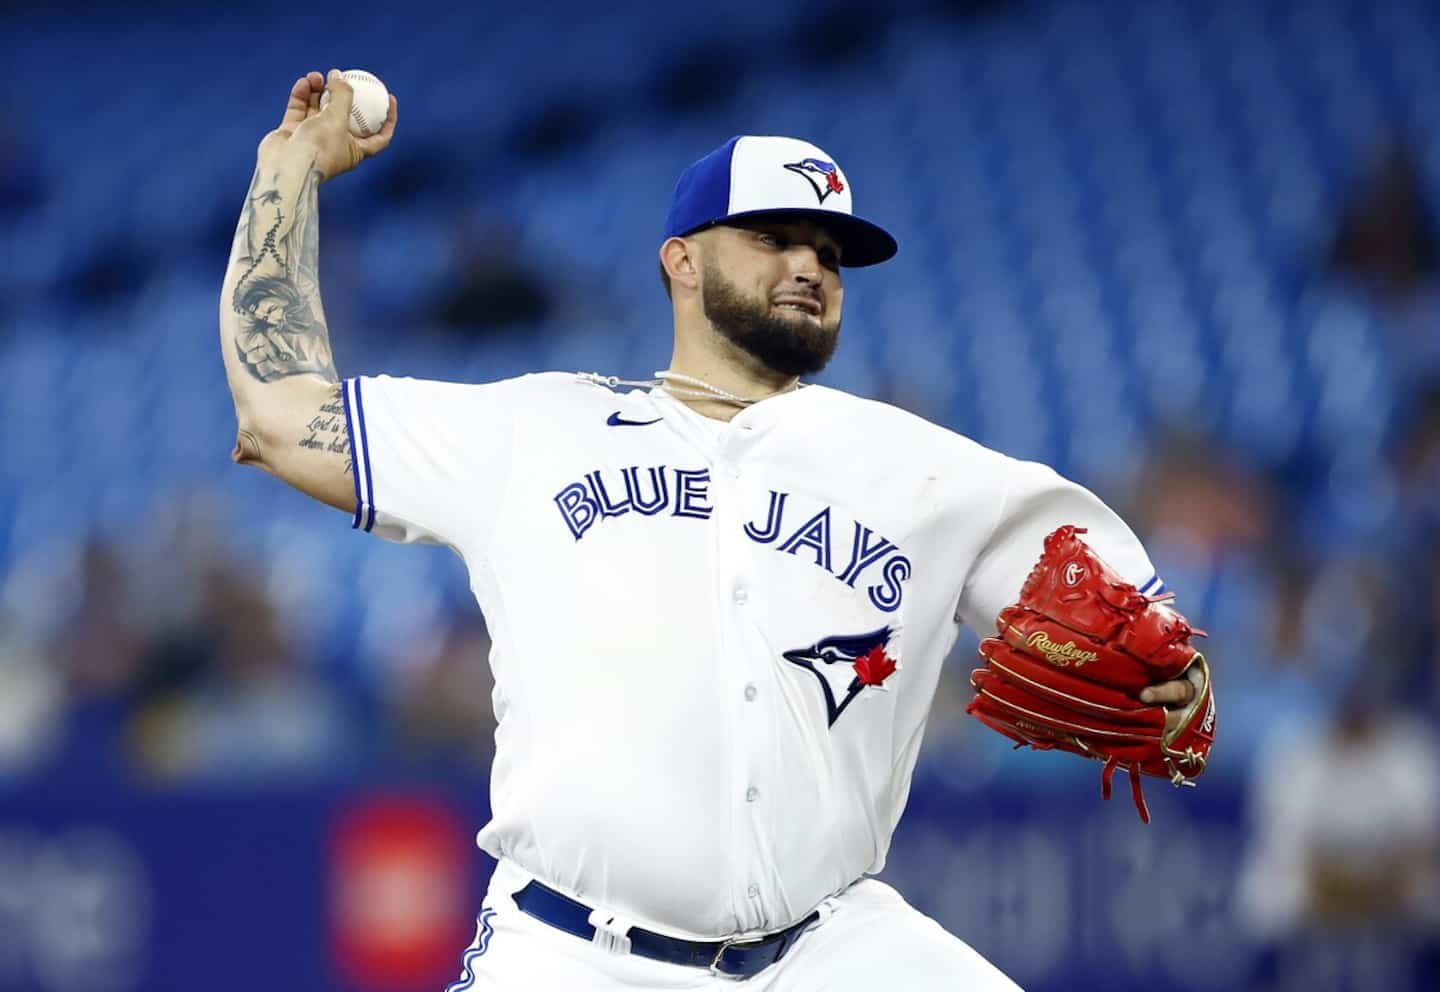 An eighth straight win for the Blue Jays